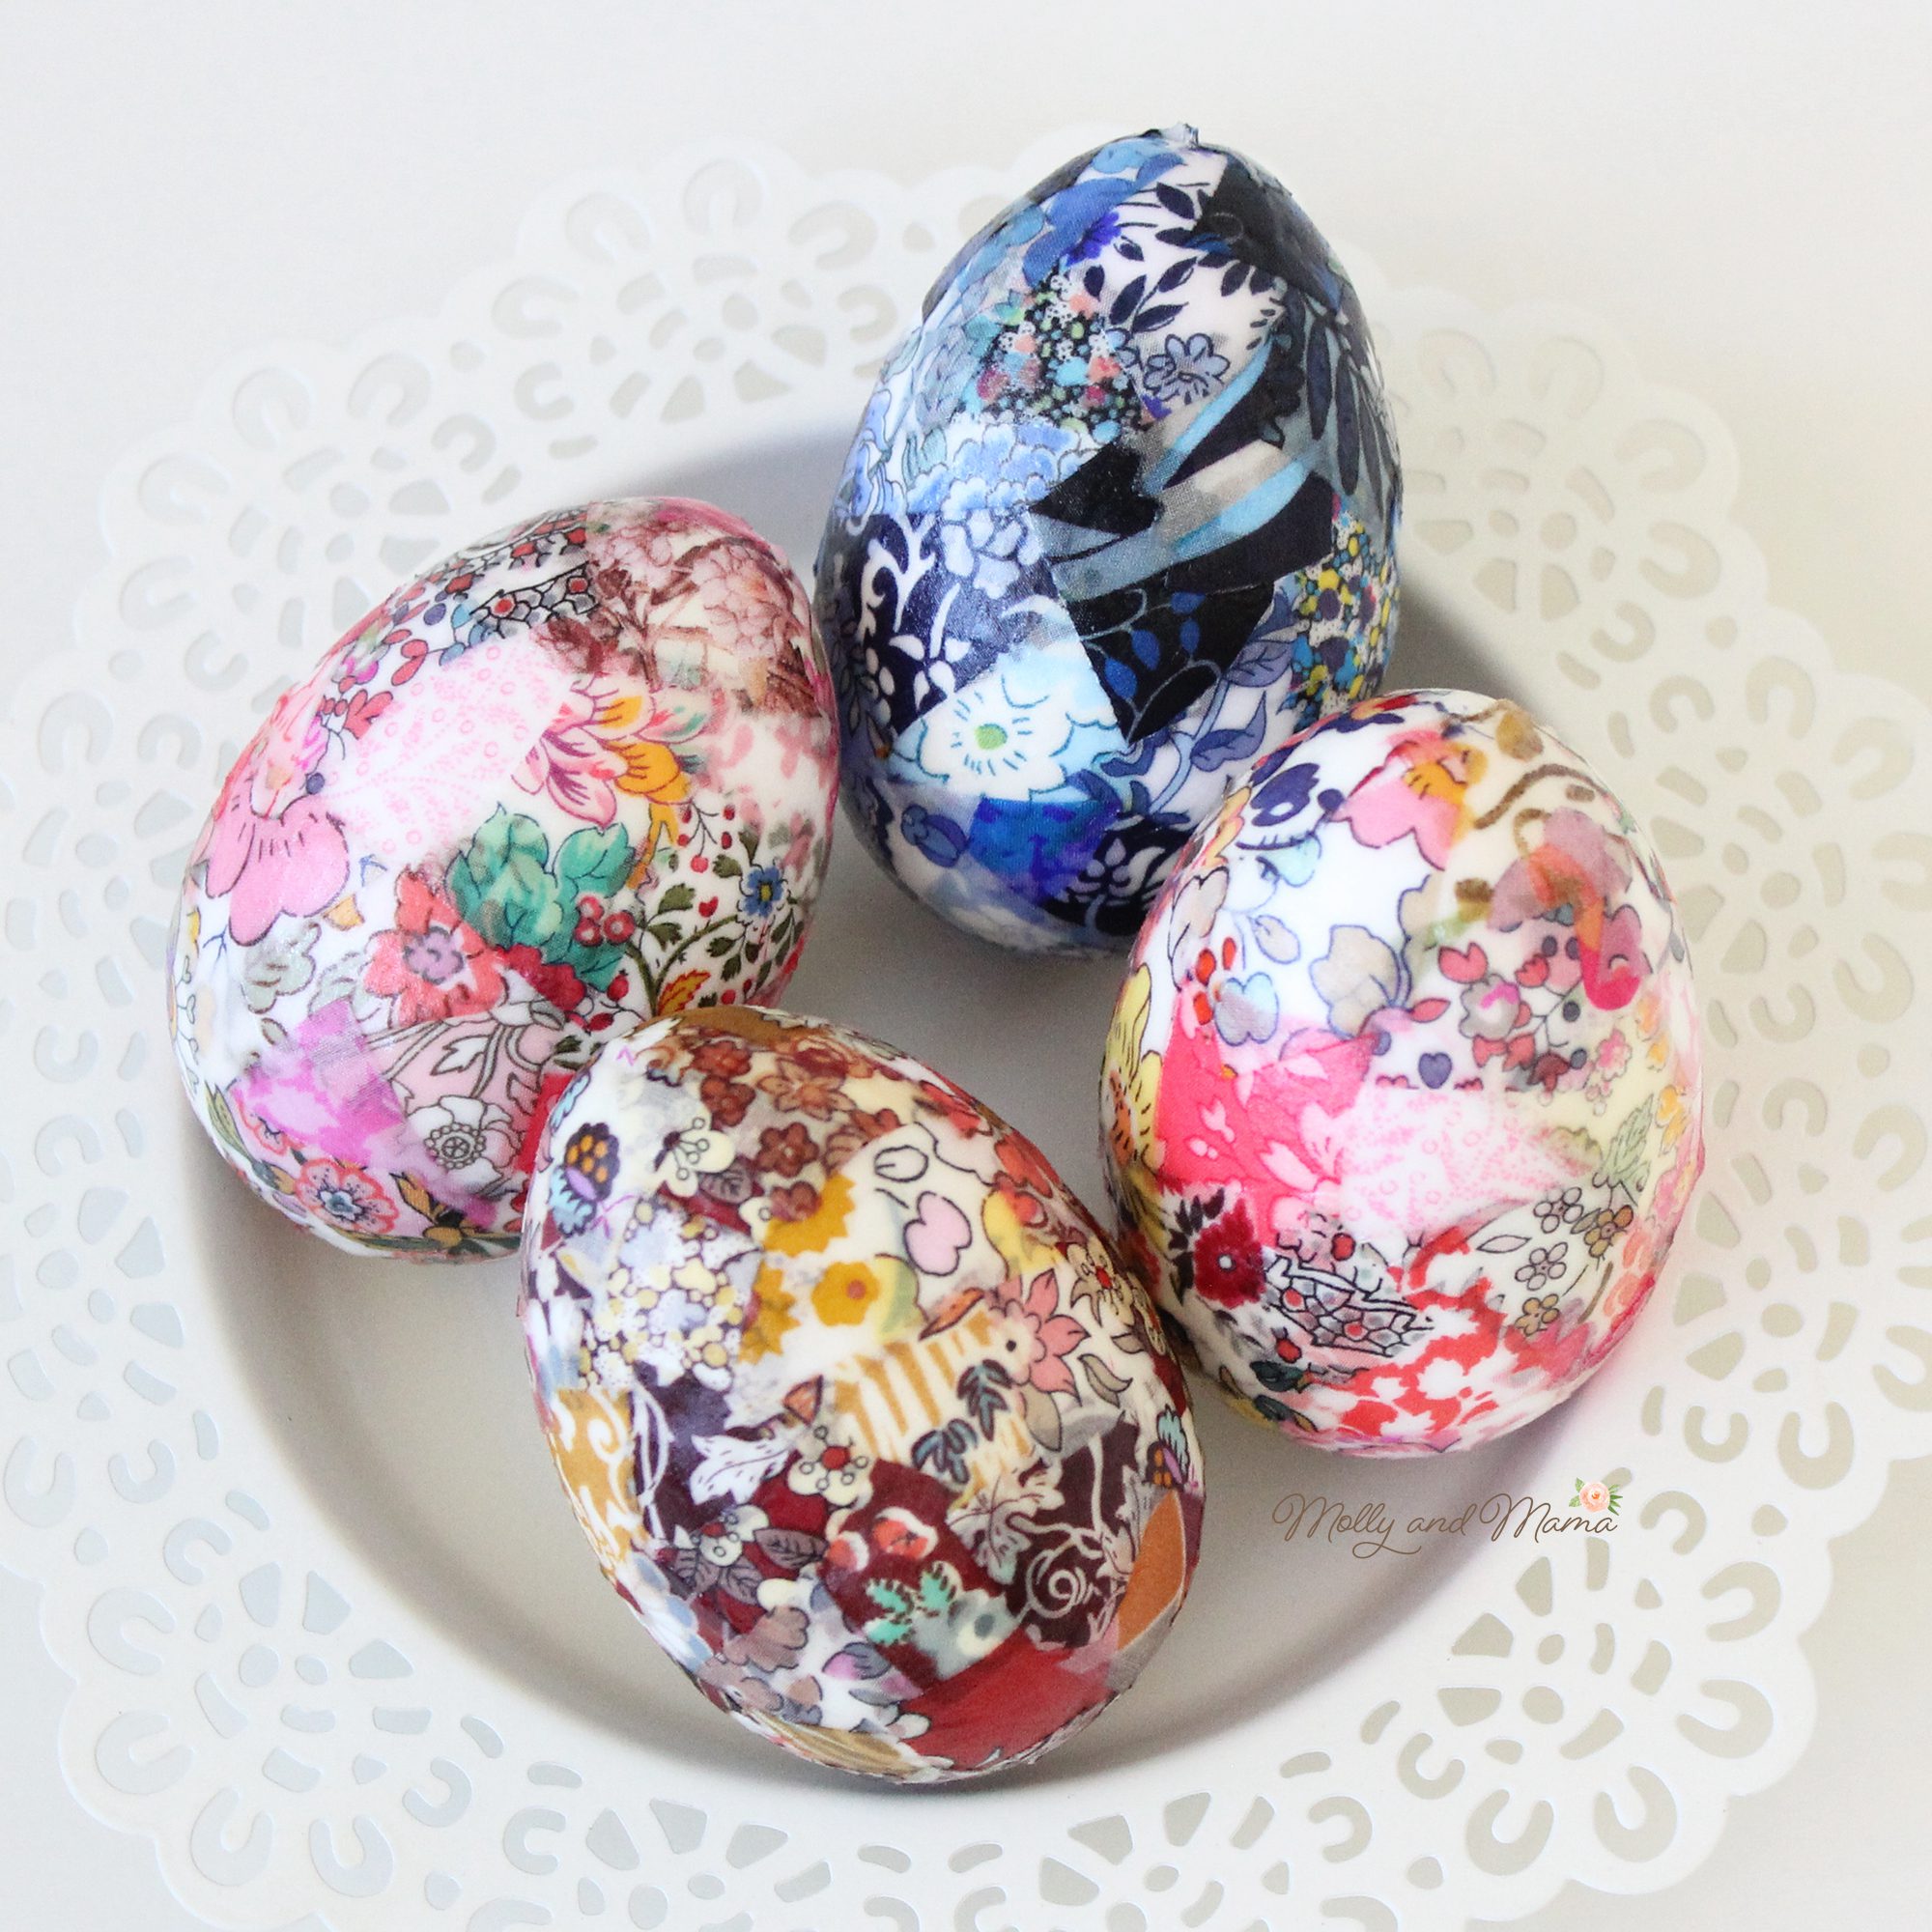 Make Scrappy Fabric Covered Easter Eggs - Molly and Mama